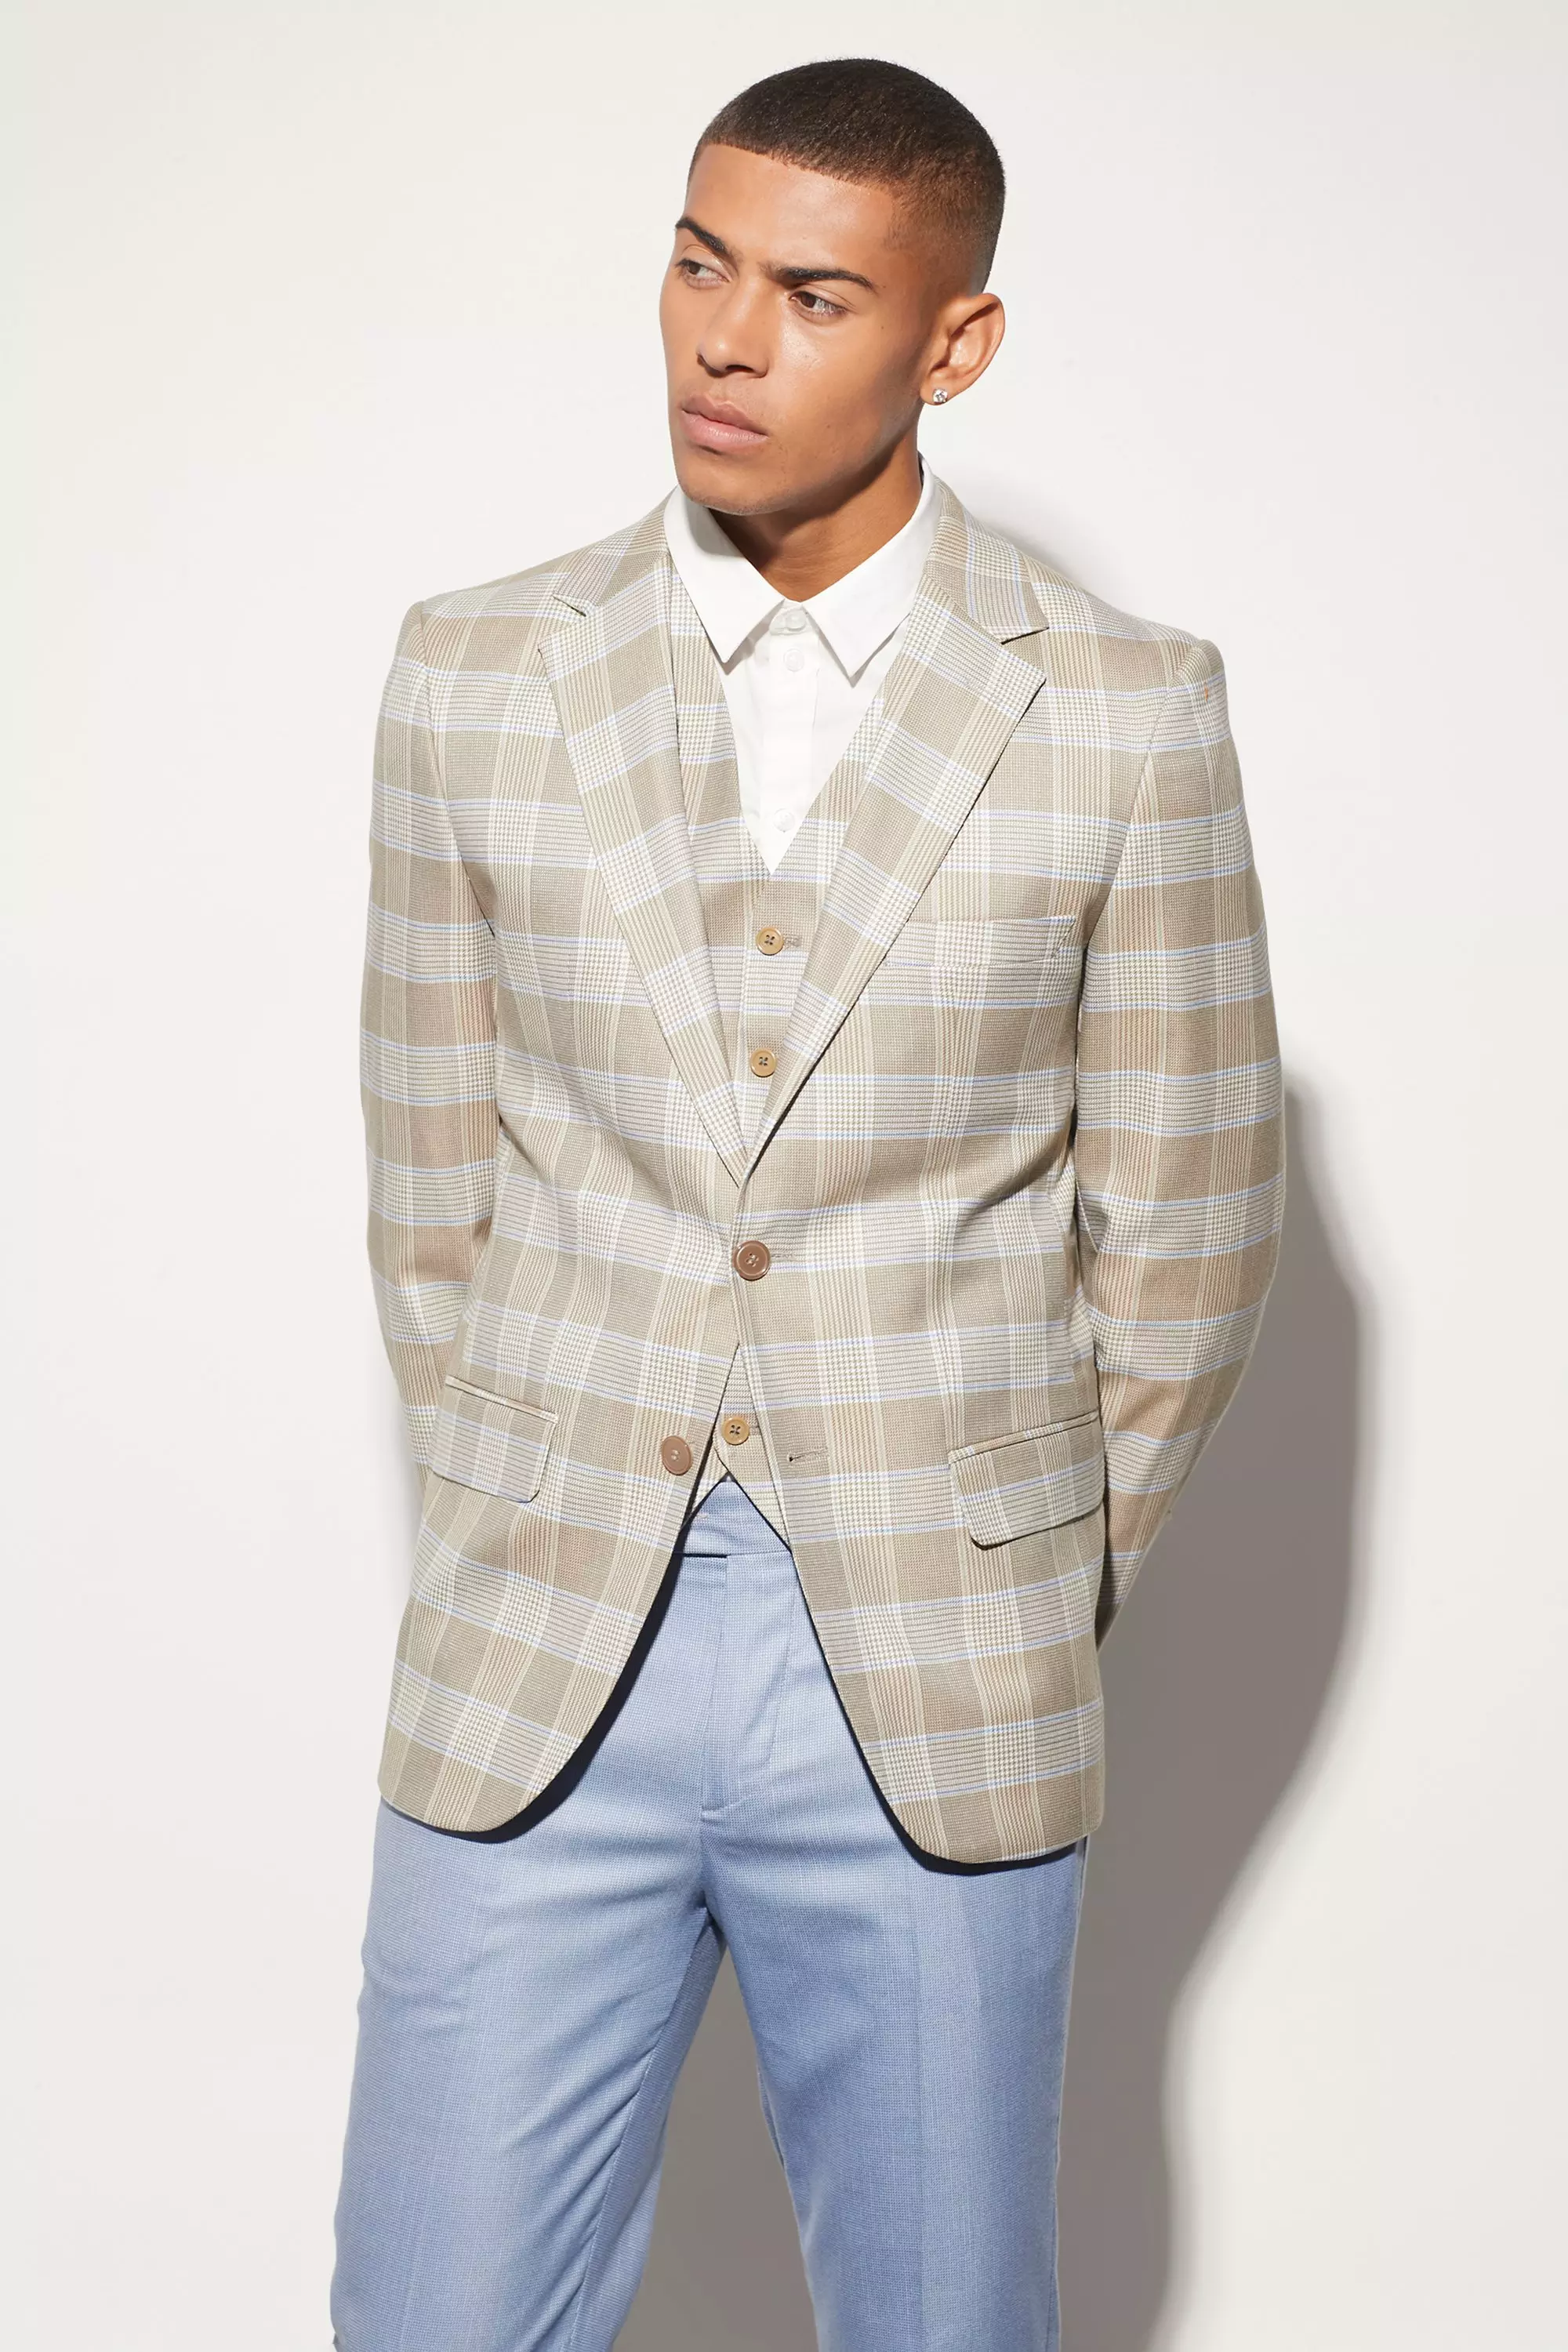 Slim Single Breasted Check Suit Jacket Light blue